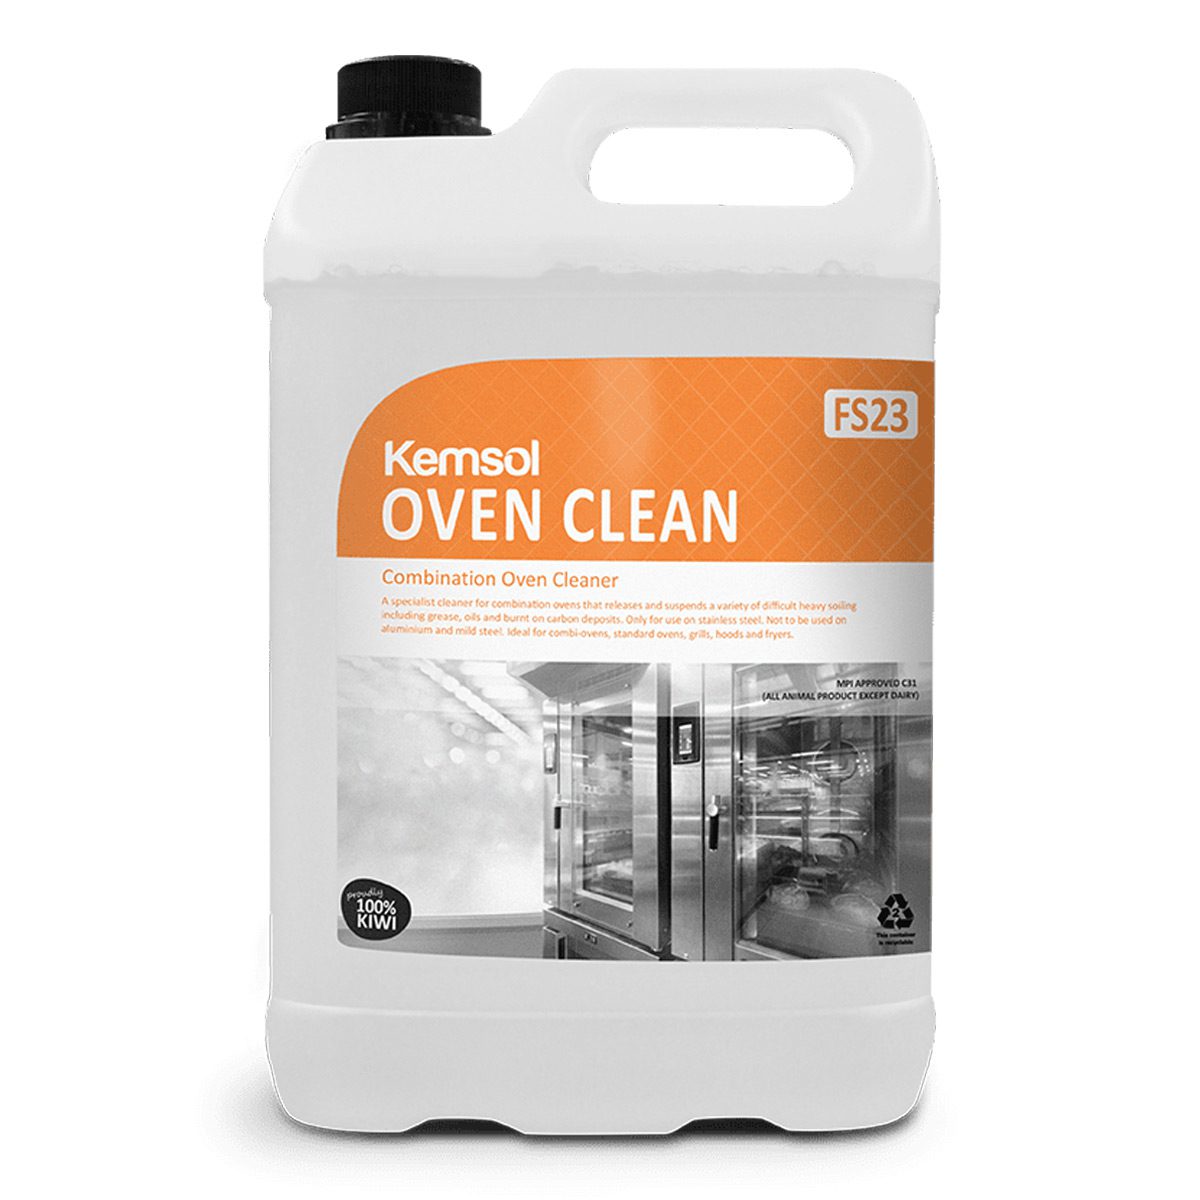 cleaning-products-kitchen-multipurpose-oven-clean-combi-5L-litre-specialist-cleaner-combination-ovens-suspends-variety-difficult-heavy-soiling-grease-oils-burnt-on-deposits-vjs-distributors-KEMOVCLEAN05